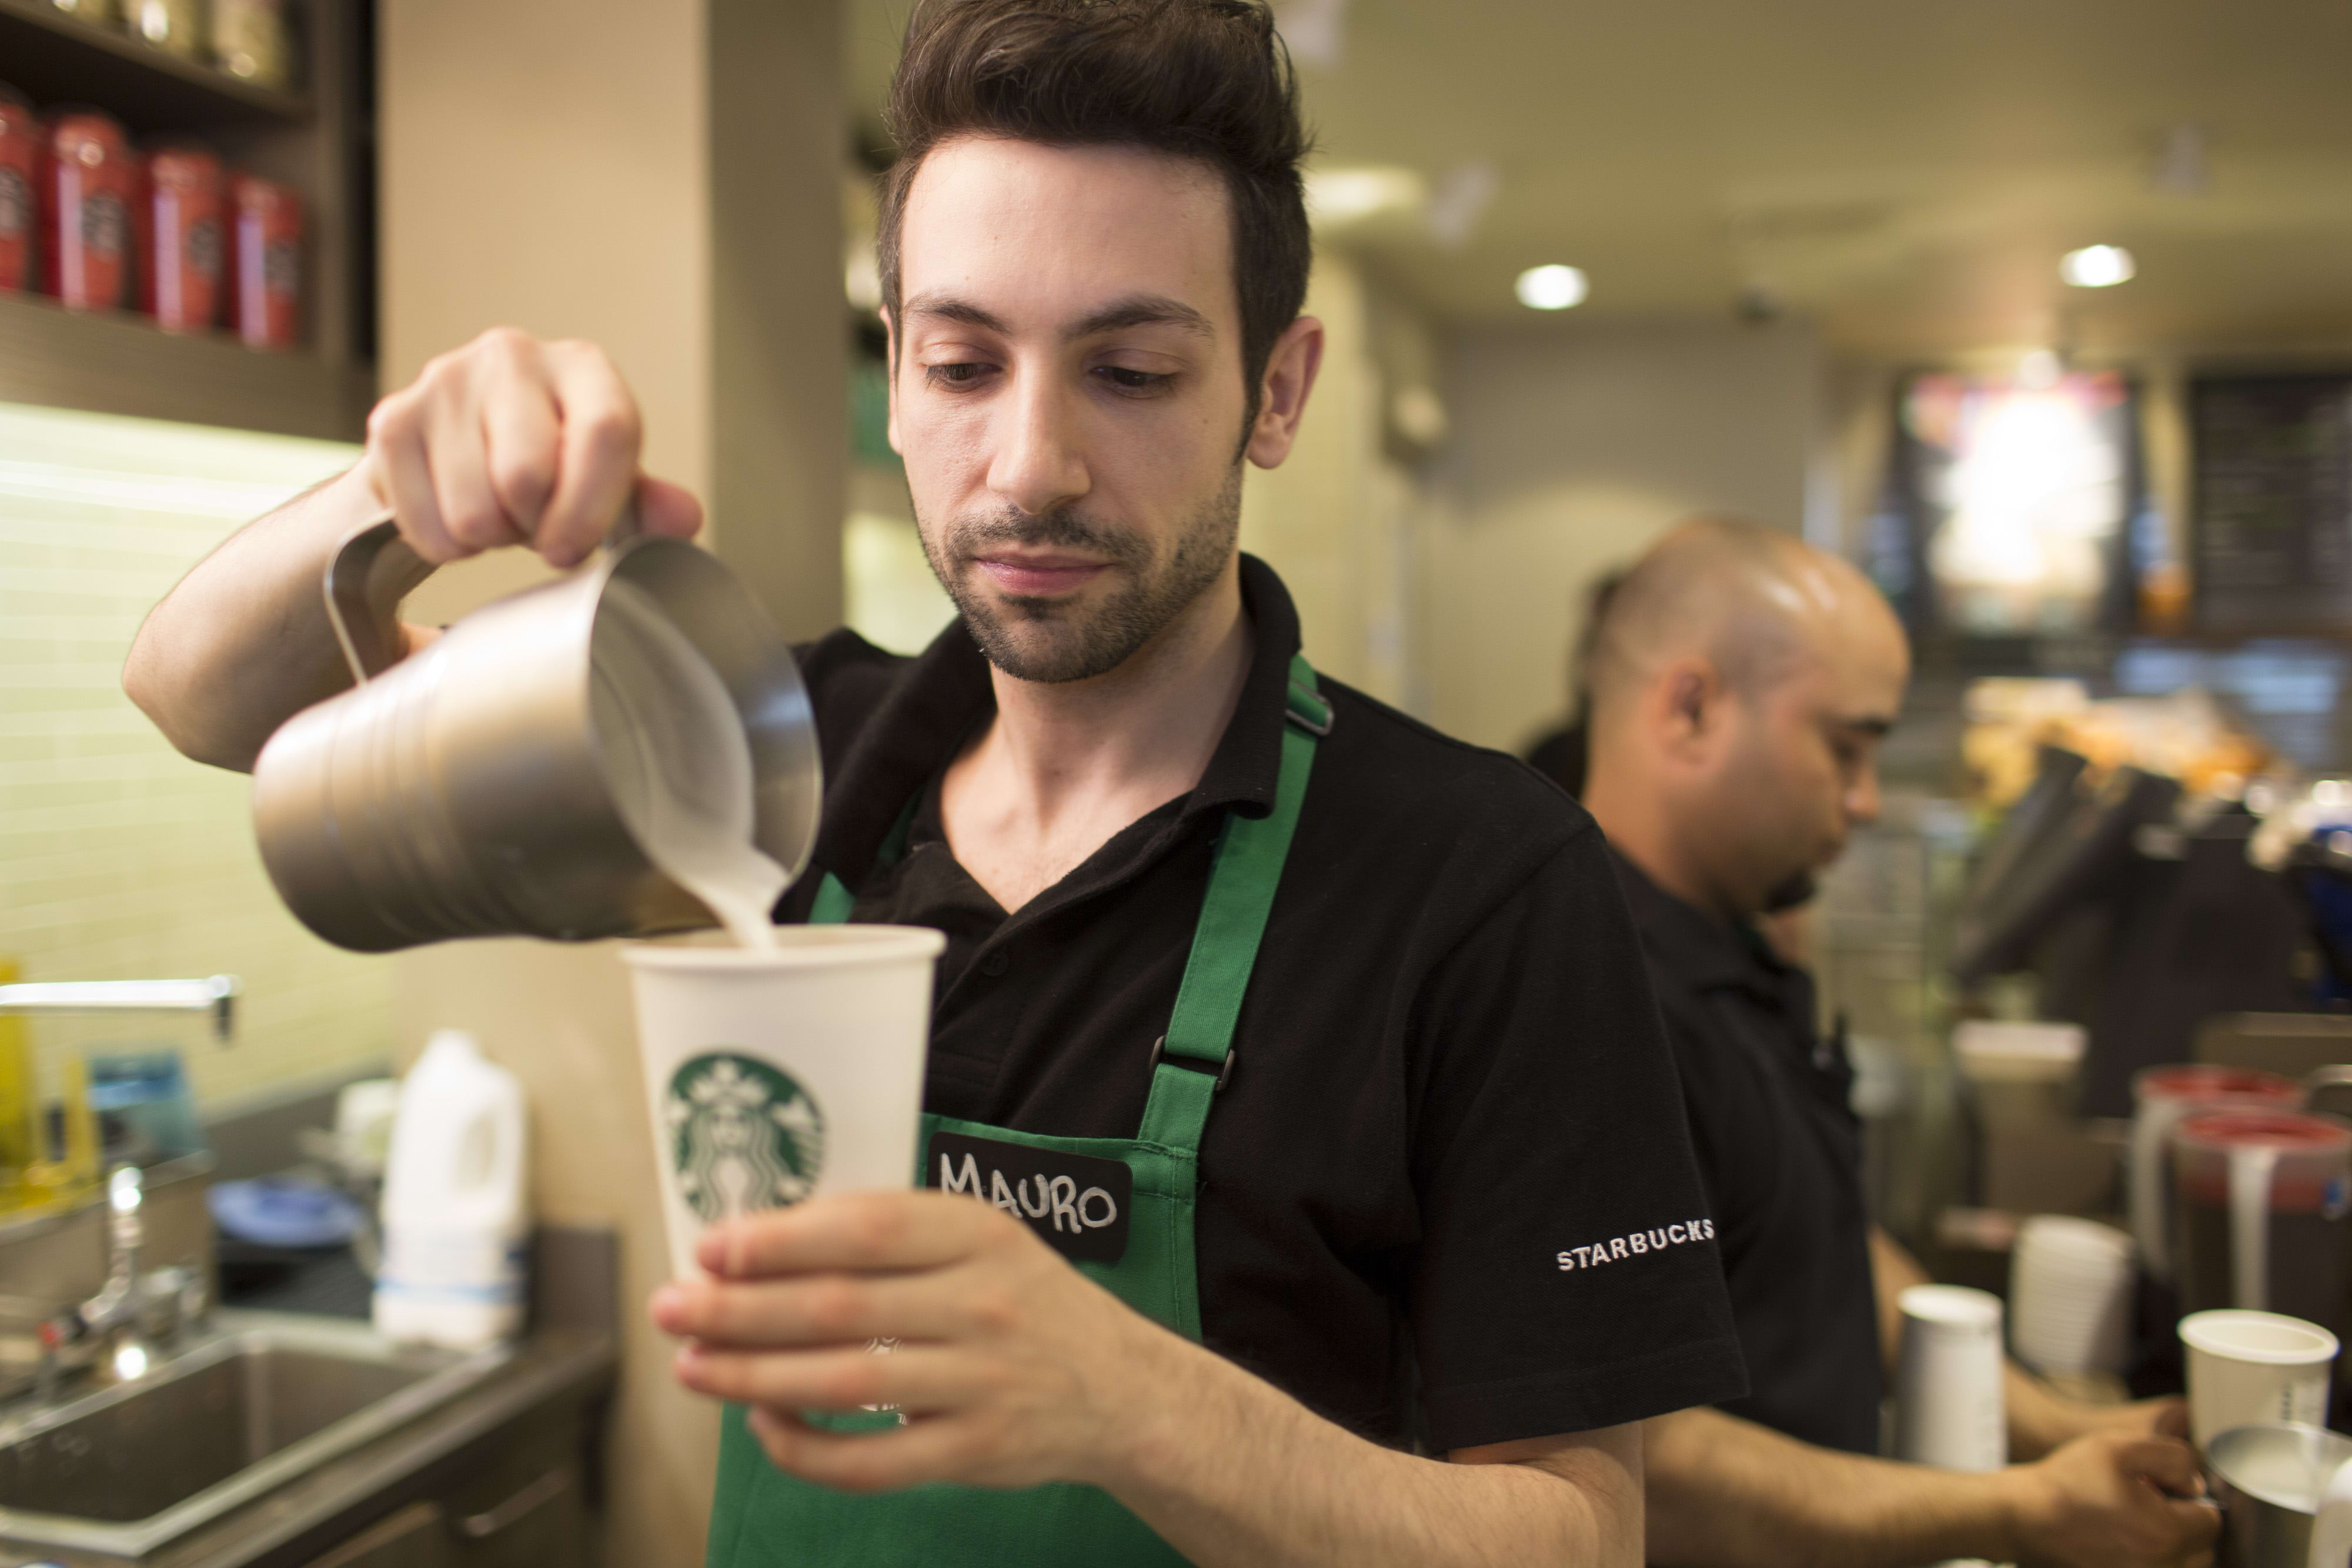 Check Out the Perks of Starbucks Employment